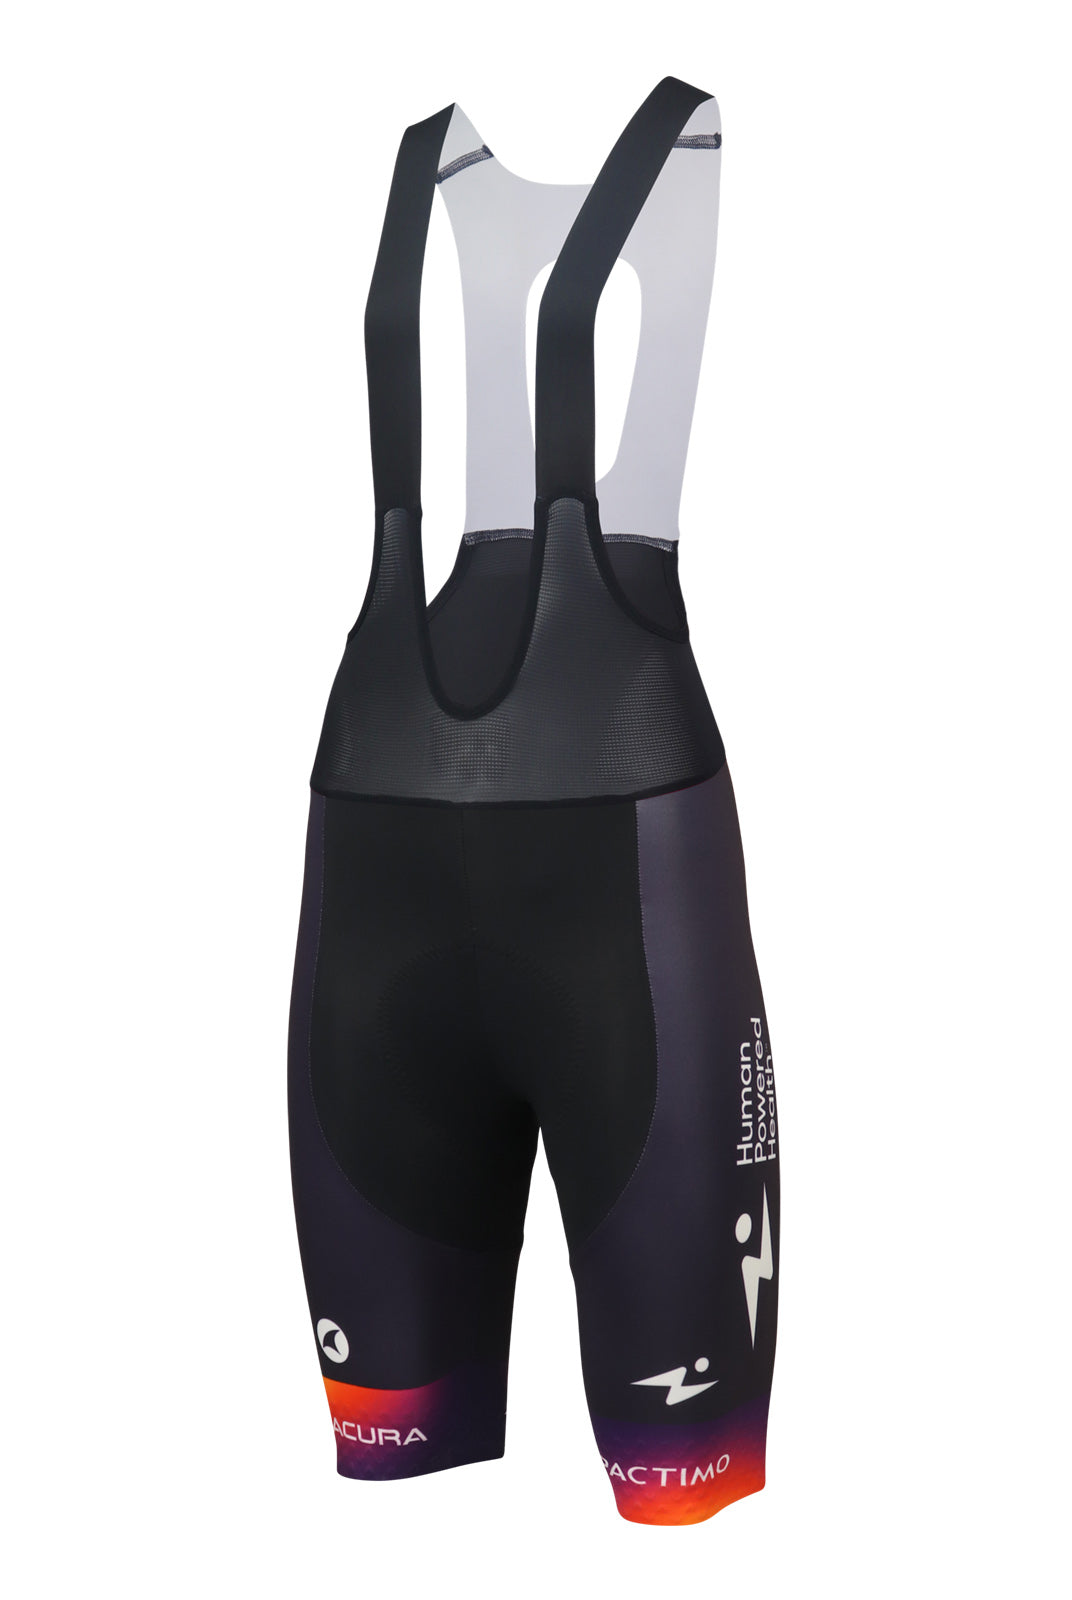 Human Powered Health Women's Flyte Cycling Bibs - Front View